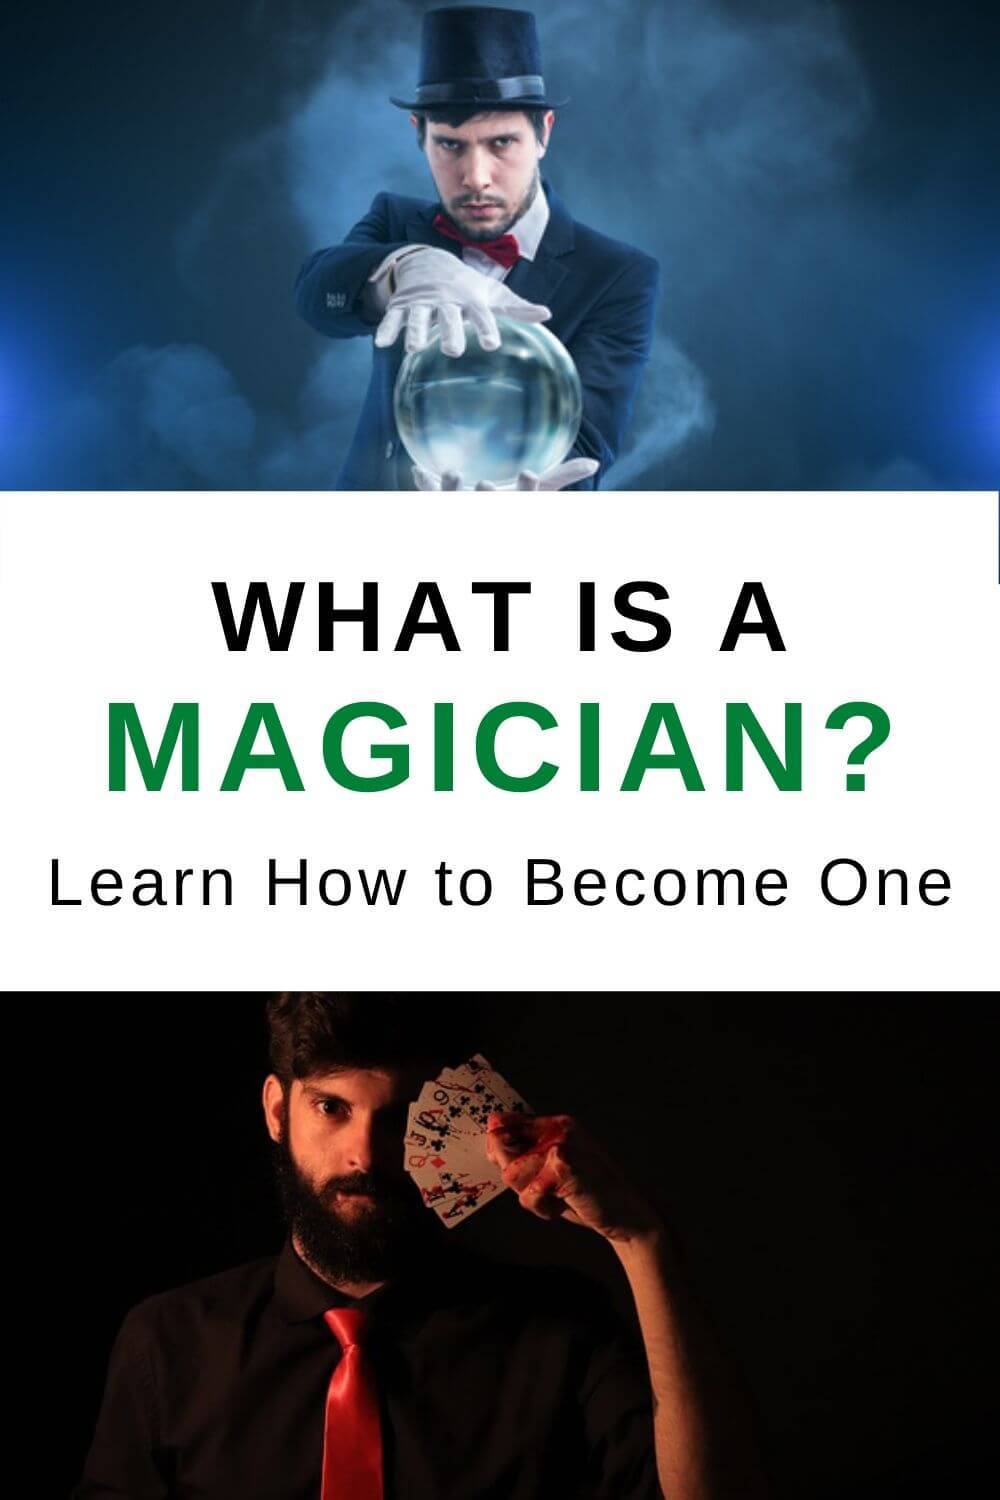 What is a magician? Learn to become one